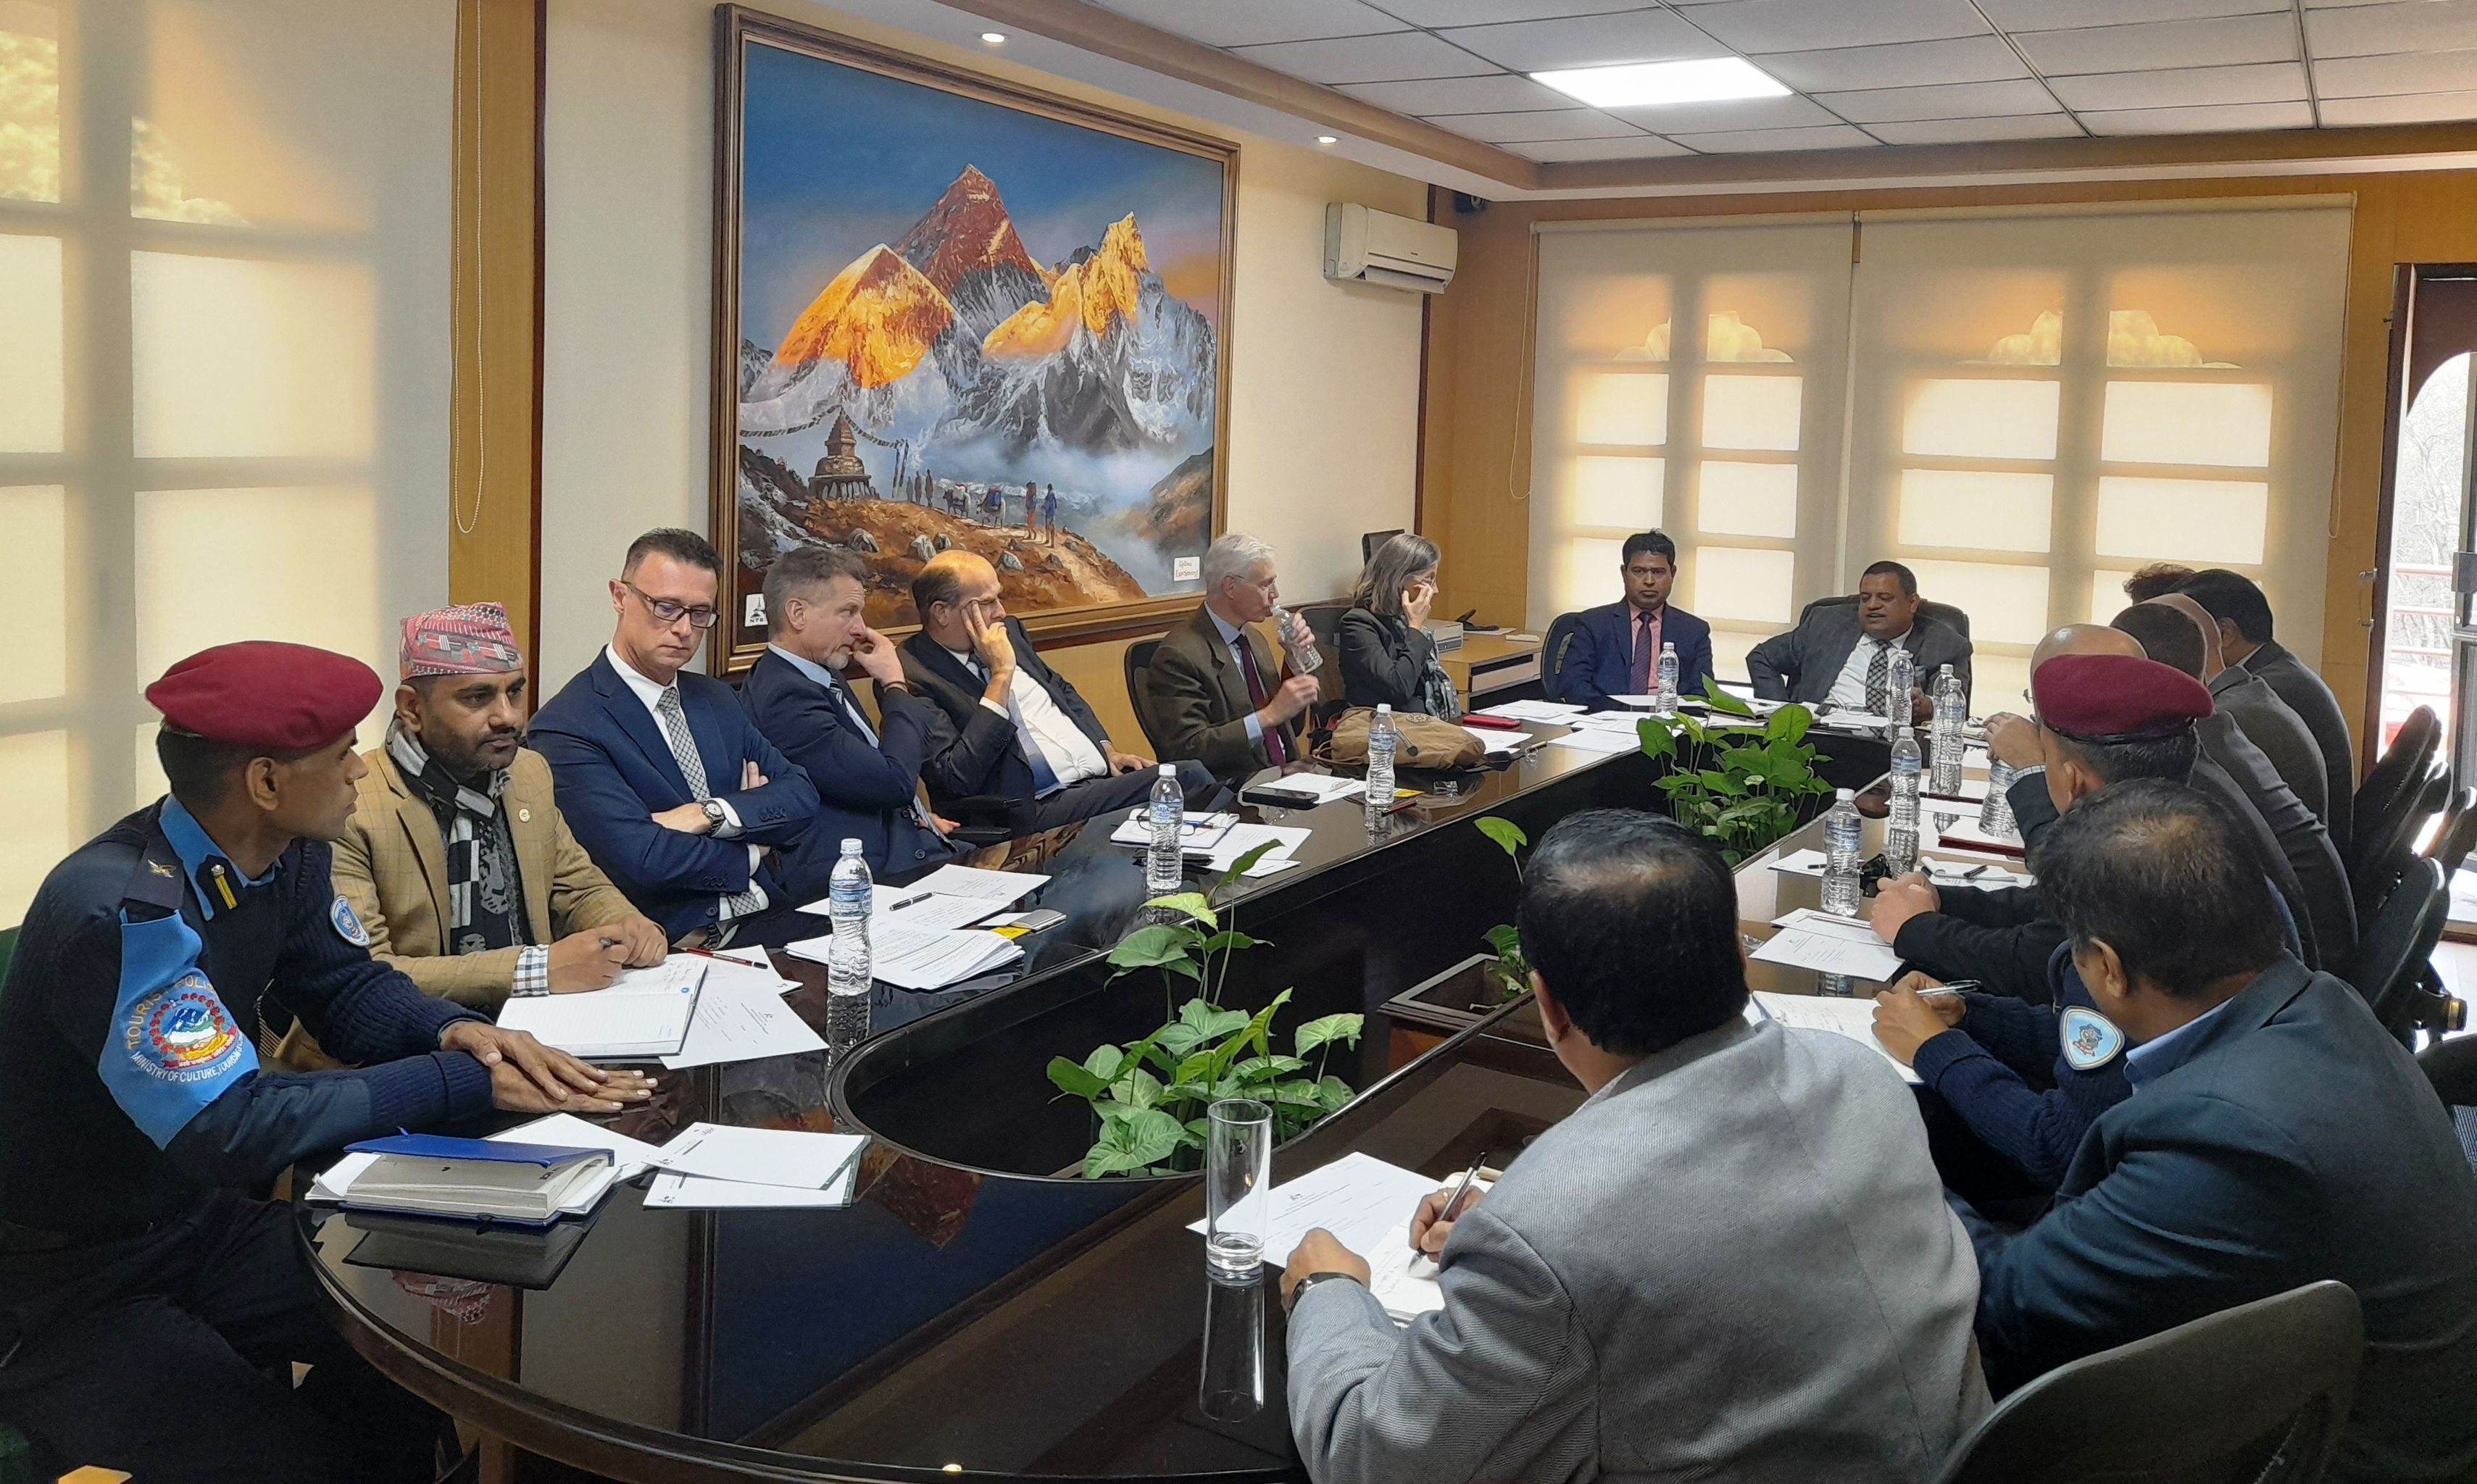 Austria expresses concern about crisis management and overall tourism in Nepal